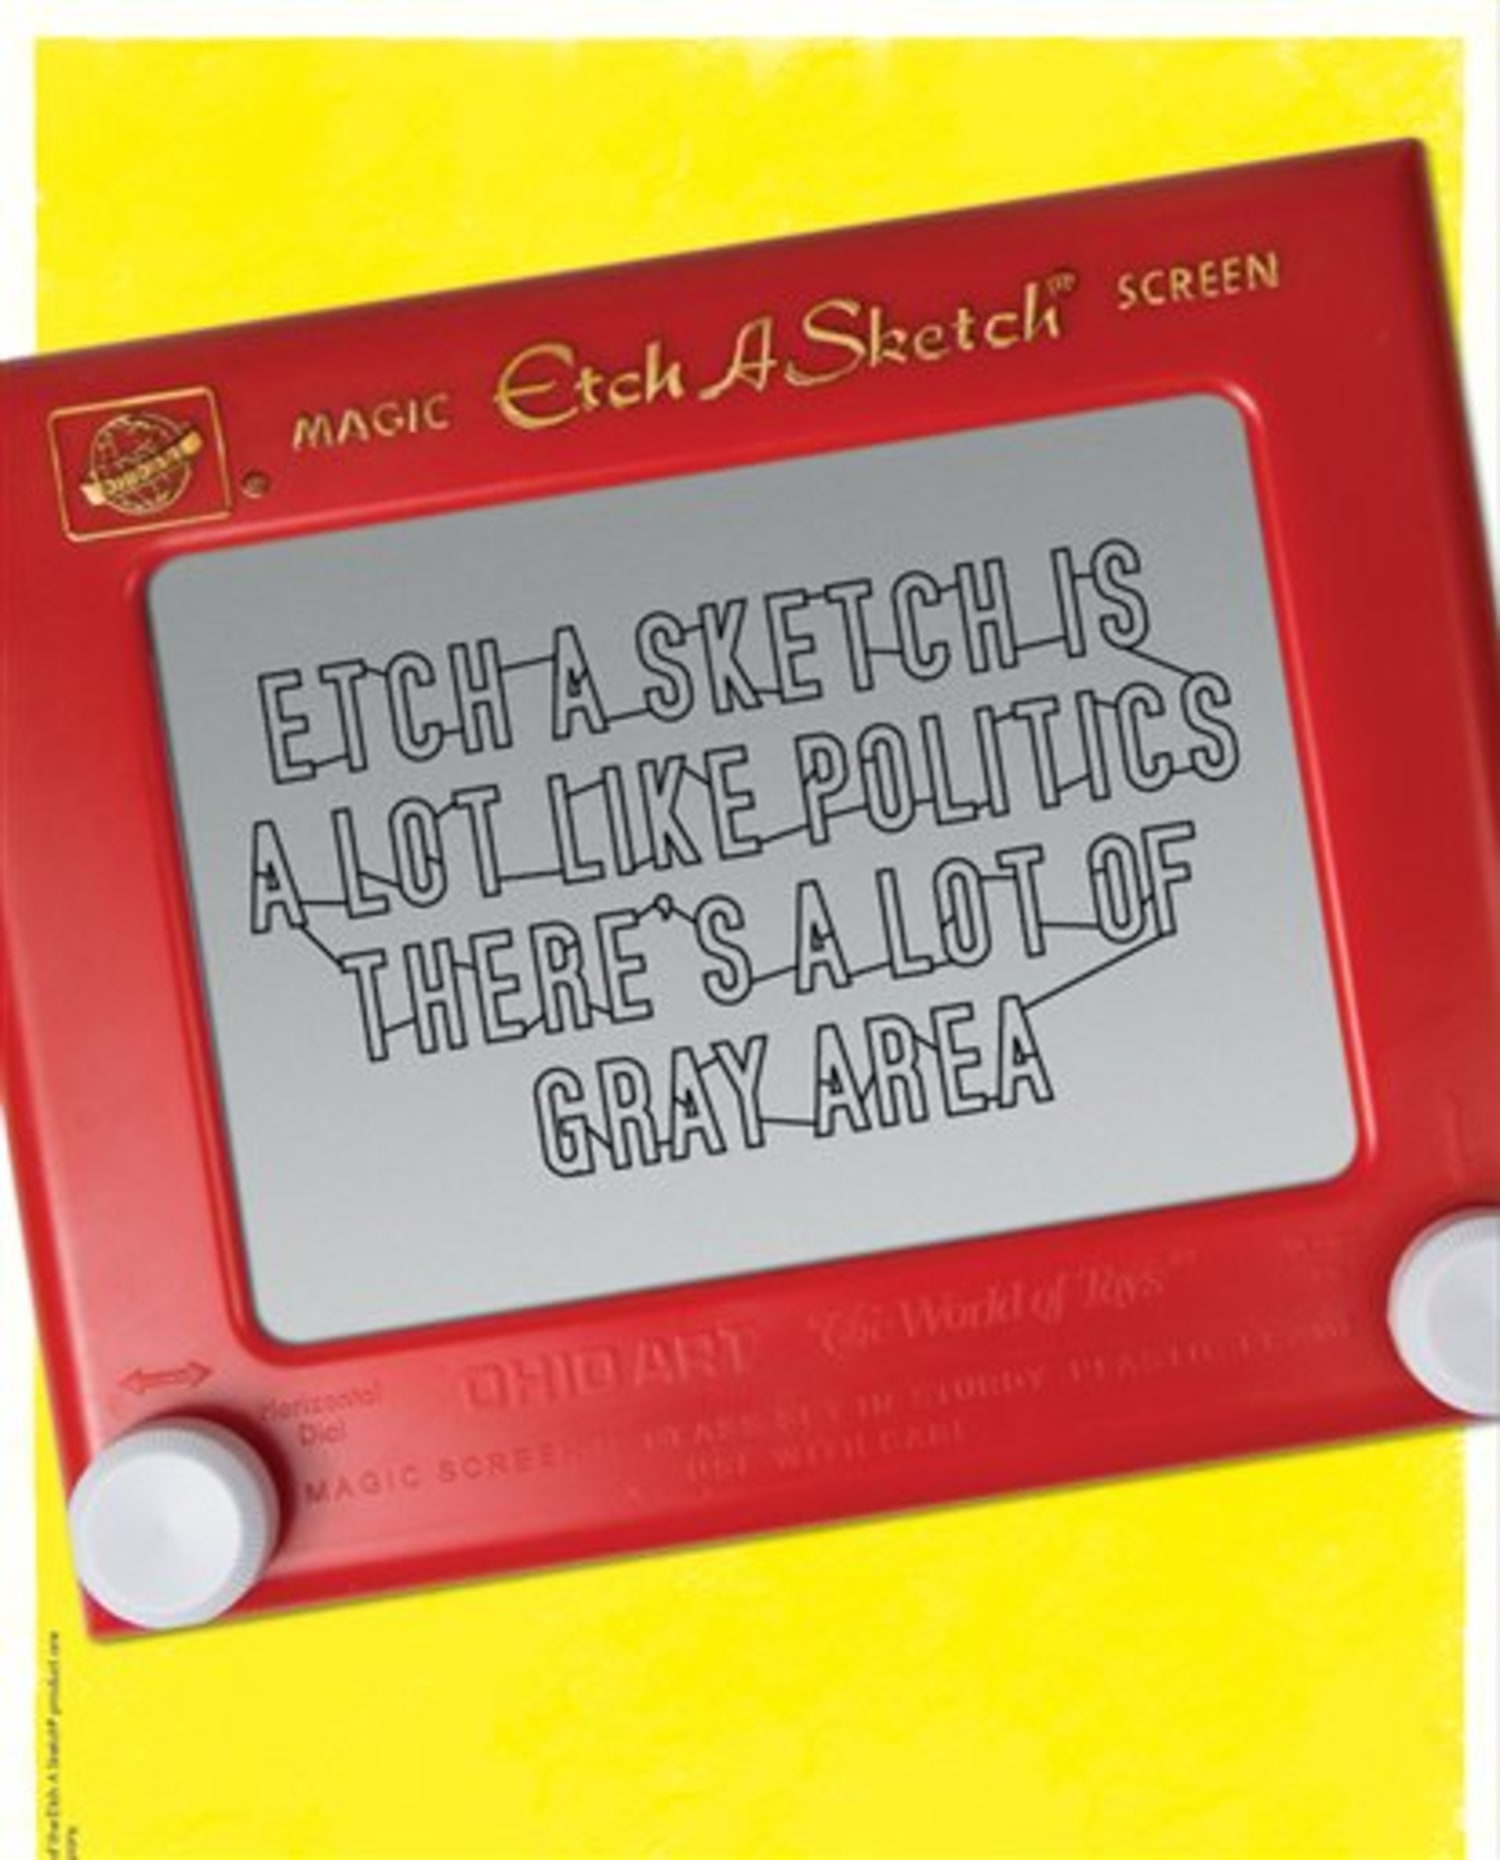 Etch A Sketch — Experience the oneLINE Gallery